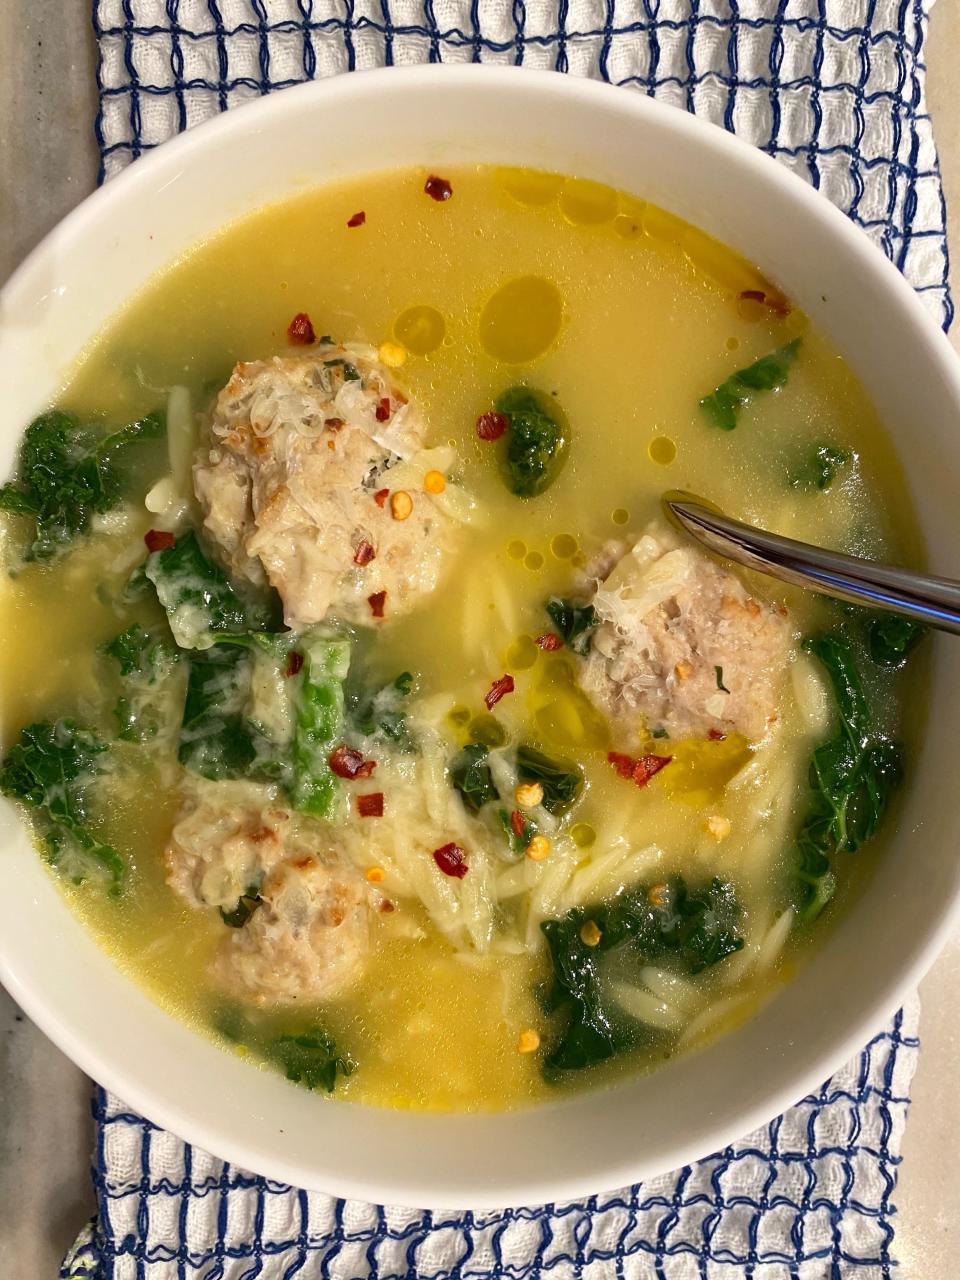 A bowl of soup with red pepper flakes.